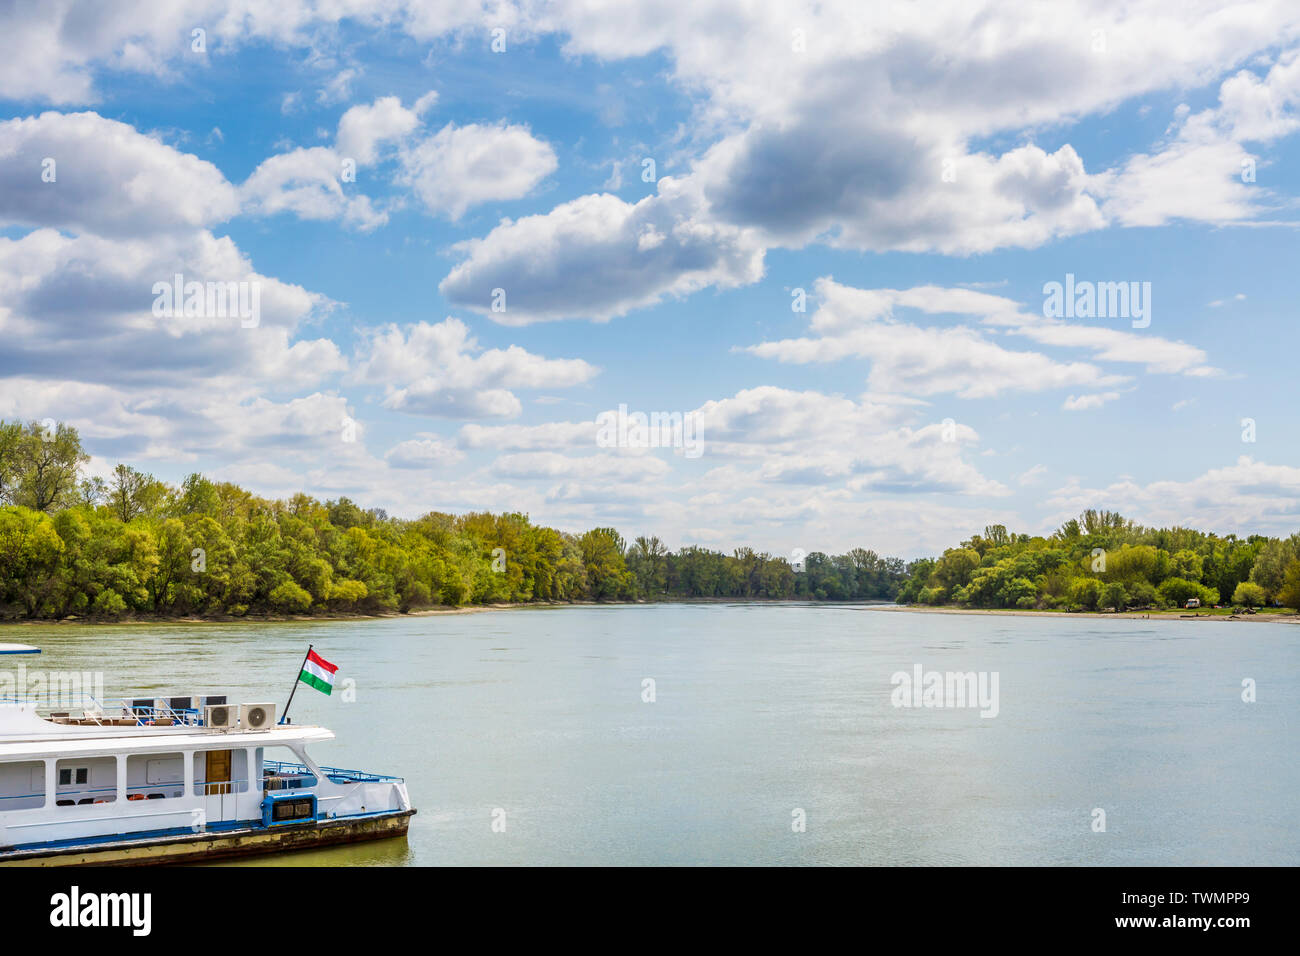 Danube river boat with Hungarian flag at Szentendre, Hungary Stock Photo